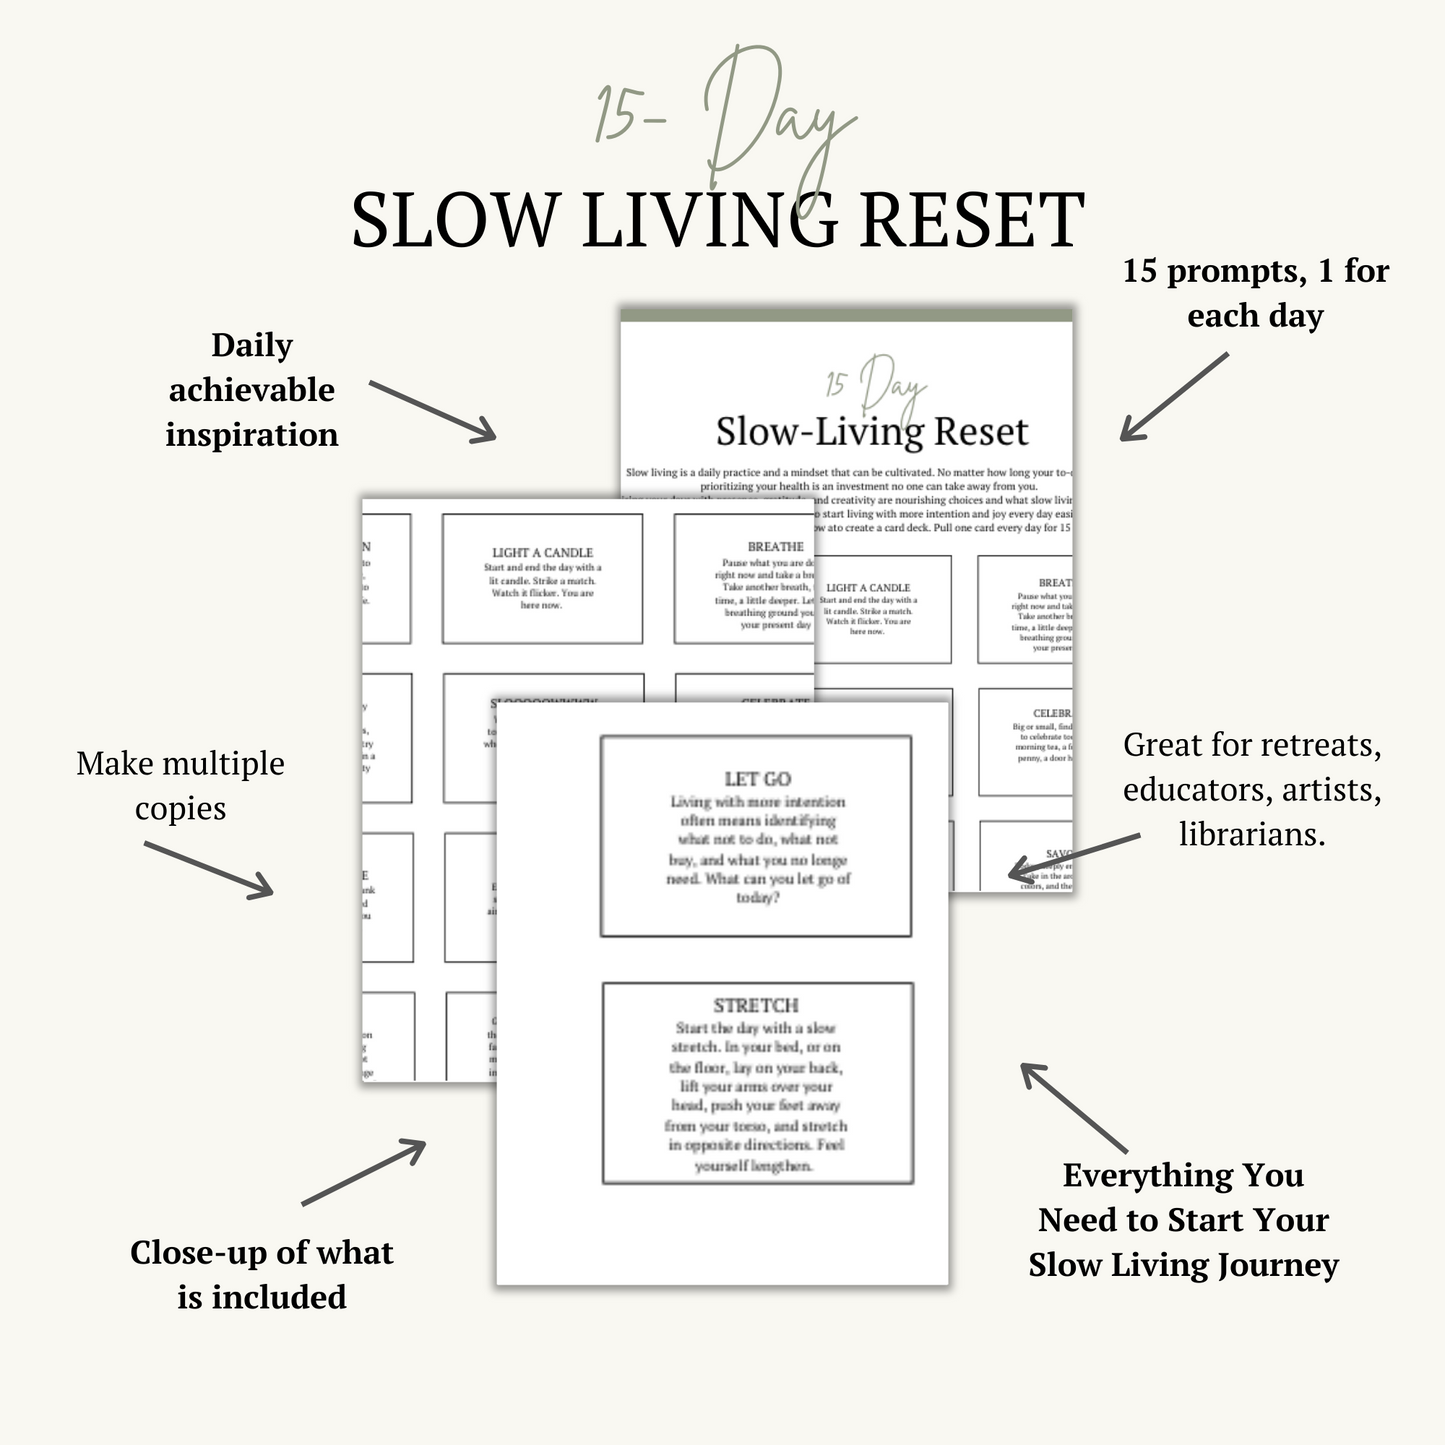 Slow Living Planner by A Farm to Keep